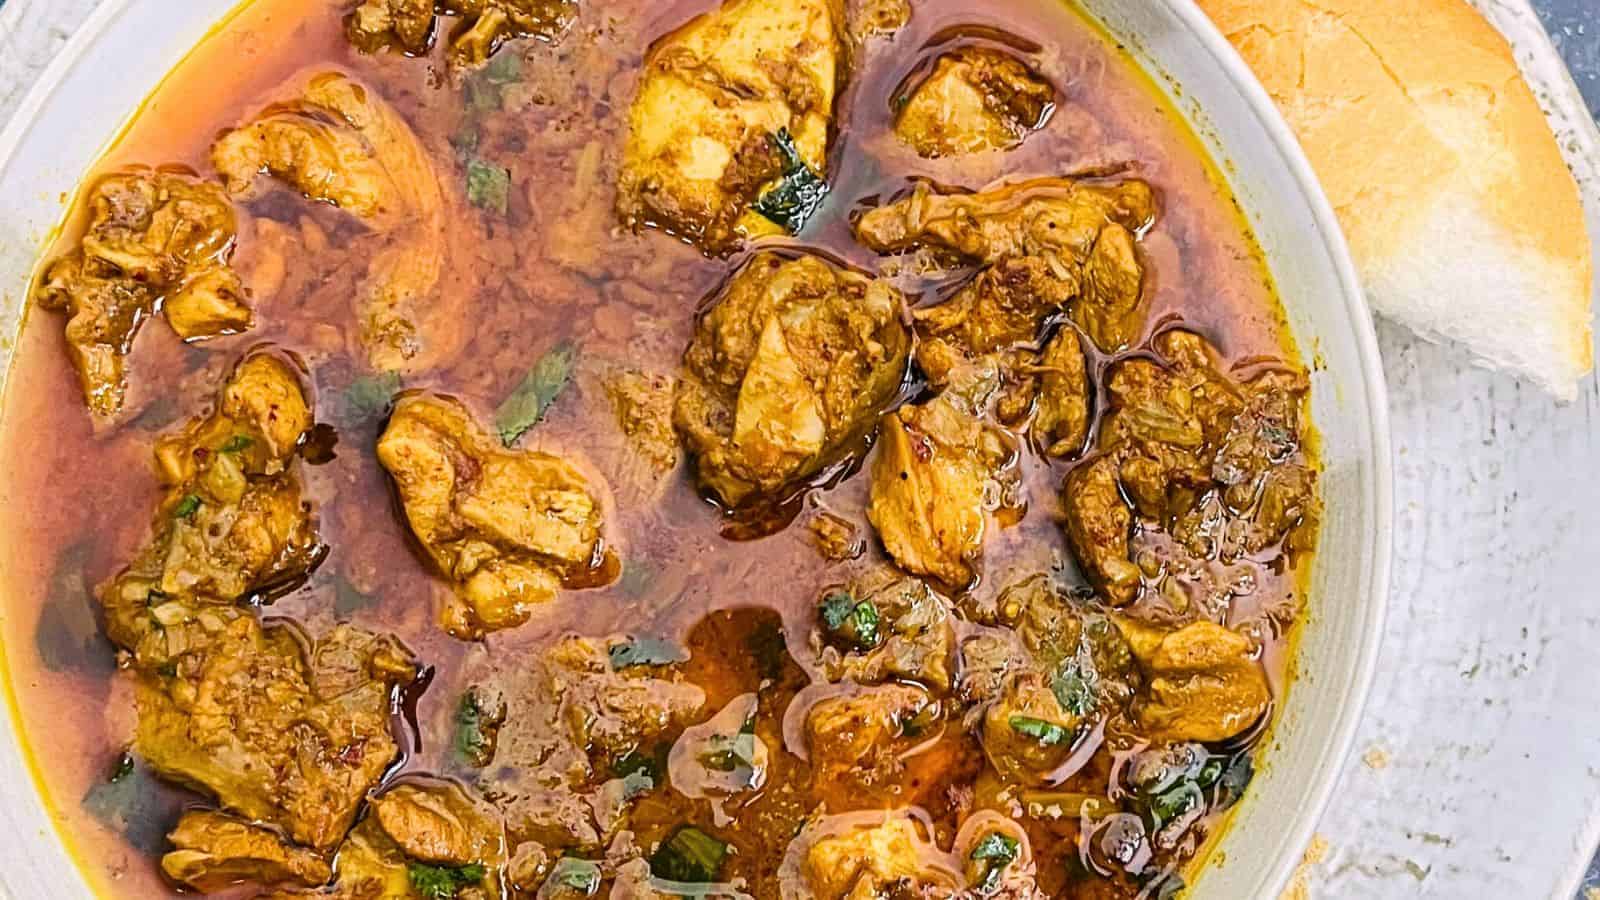 <p>Craving something spicy but short on time? Look no further than Instant Pot Chicken Vindaloo. If you’re a fan of Indian cuisine or simply looking to spice up your dinner routine, this dish is sure to impress. With its rich flavors and hearty texture, it’s the perfect comfort food for any occasion.<br><strong>Get the Recipe: </strong><a href="https://easyindiancookbook.com/chicken-vindaloo/?utm_source=msn&utm_medium=page&utm_campaign=Carnivore%20cravings%20conquered!%2017%20epic%20meaty%20dishes">Instant Pot Chicken Vindaloo</a></p>